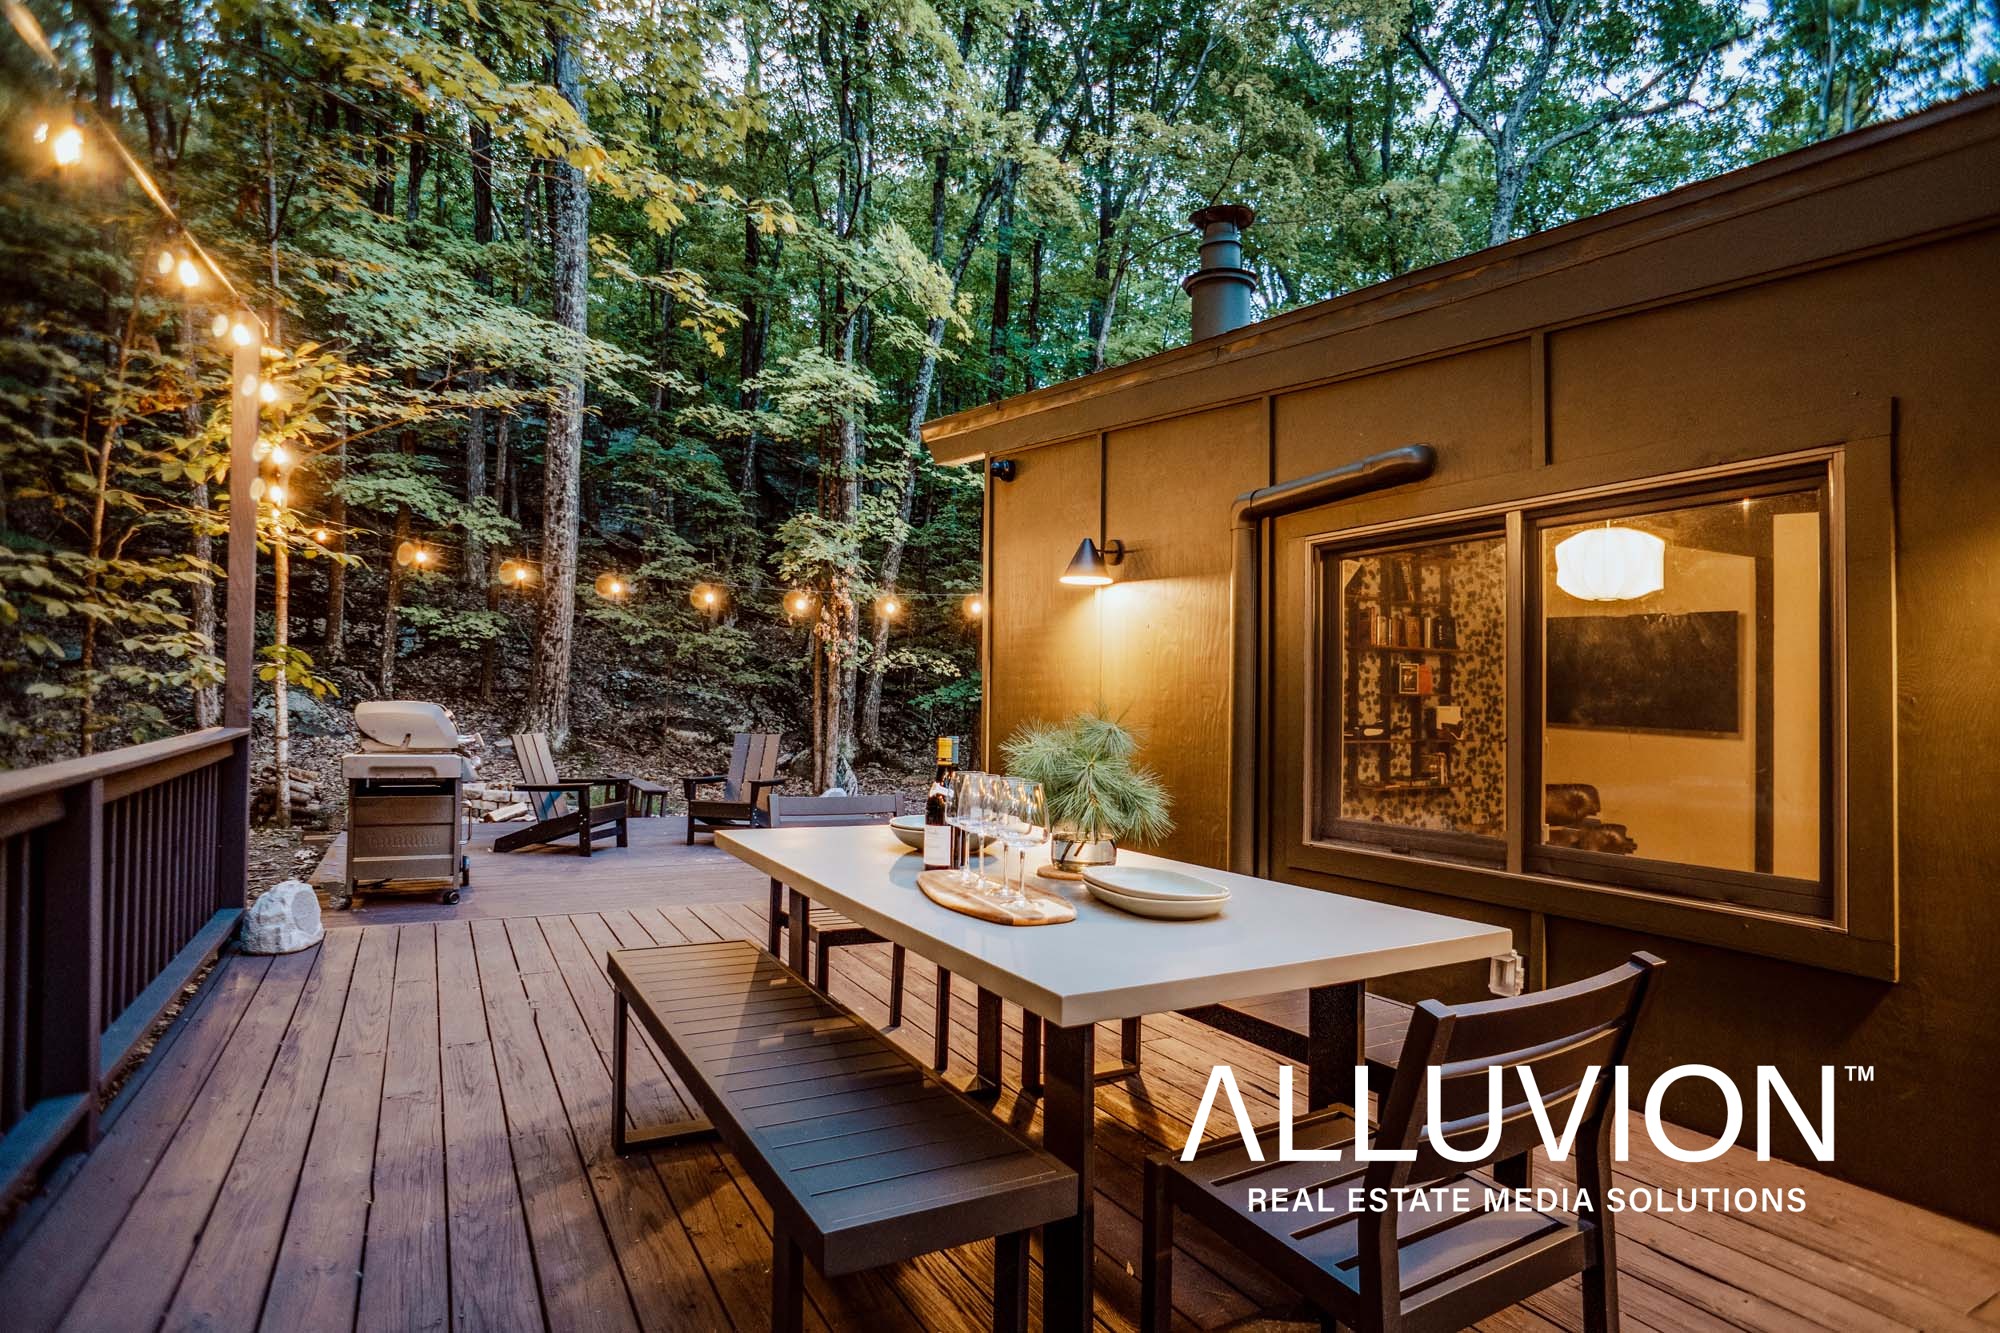 Modern Rustic Woodstock Cabin – Airbnb Photography by Photographer Maxwell Alexander – Hudson Valley – Catskills